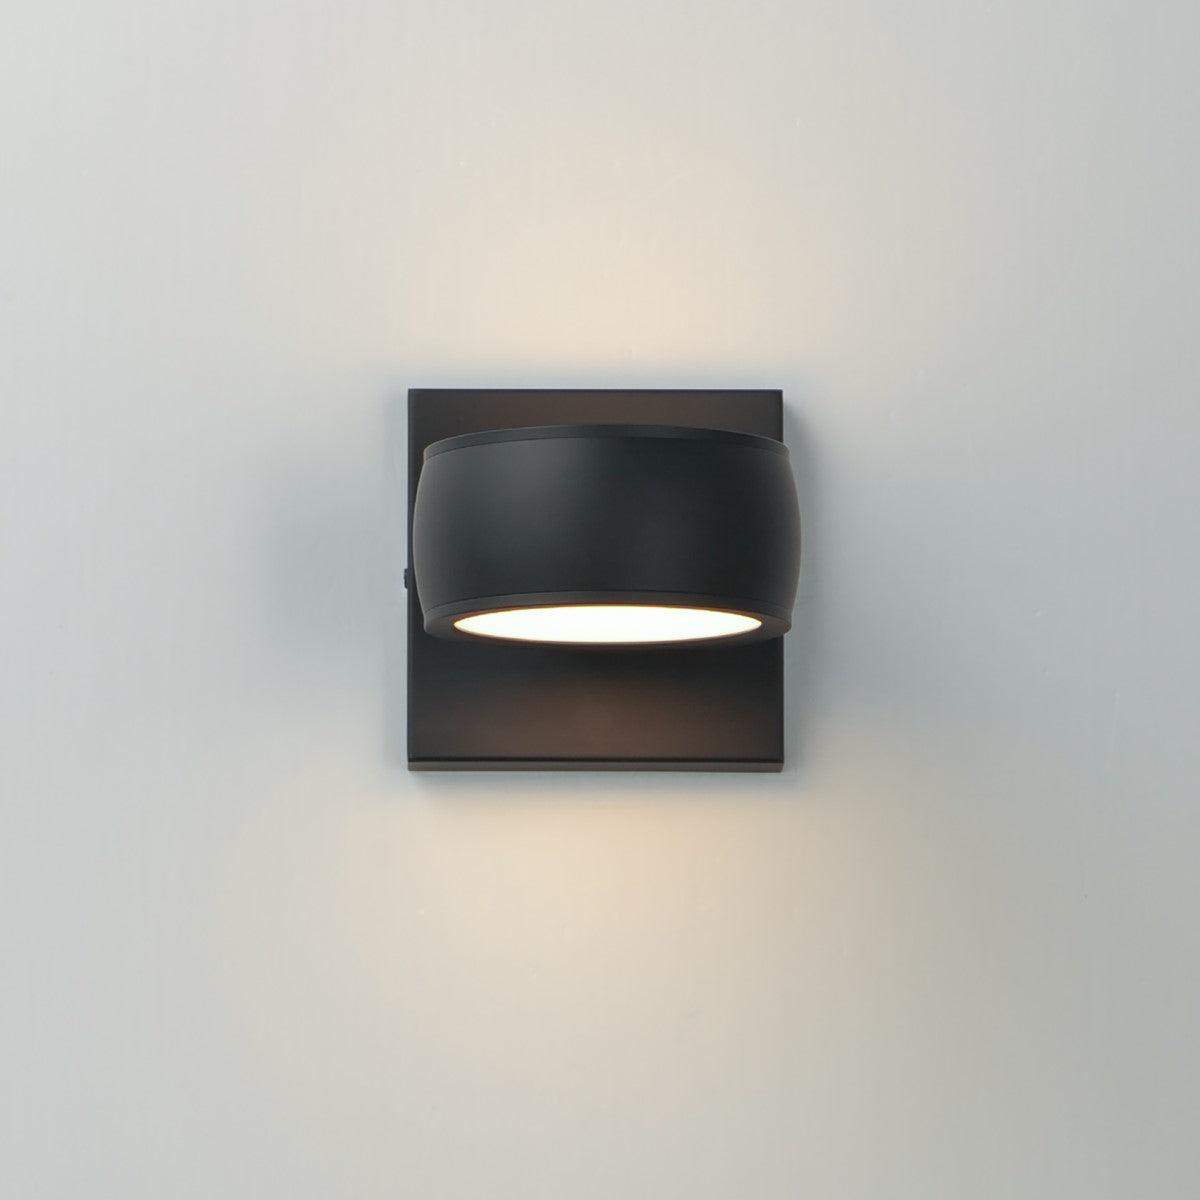 Modular 5 in. Round LED Outdoor Wall Sconce 3000K Black Finish